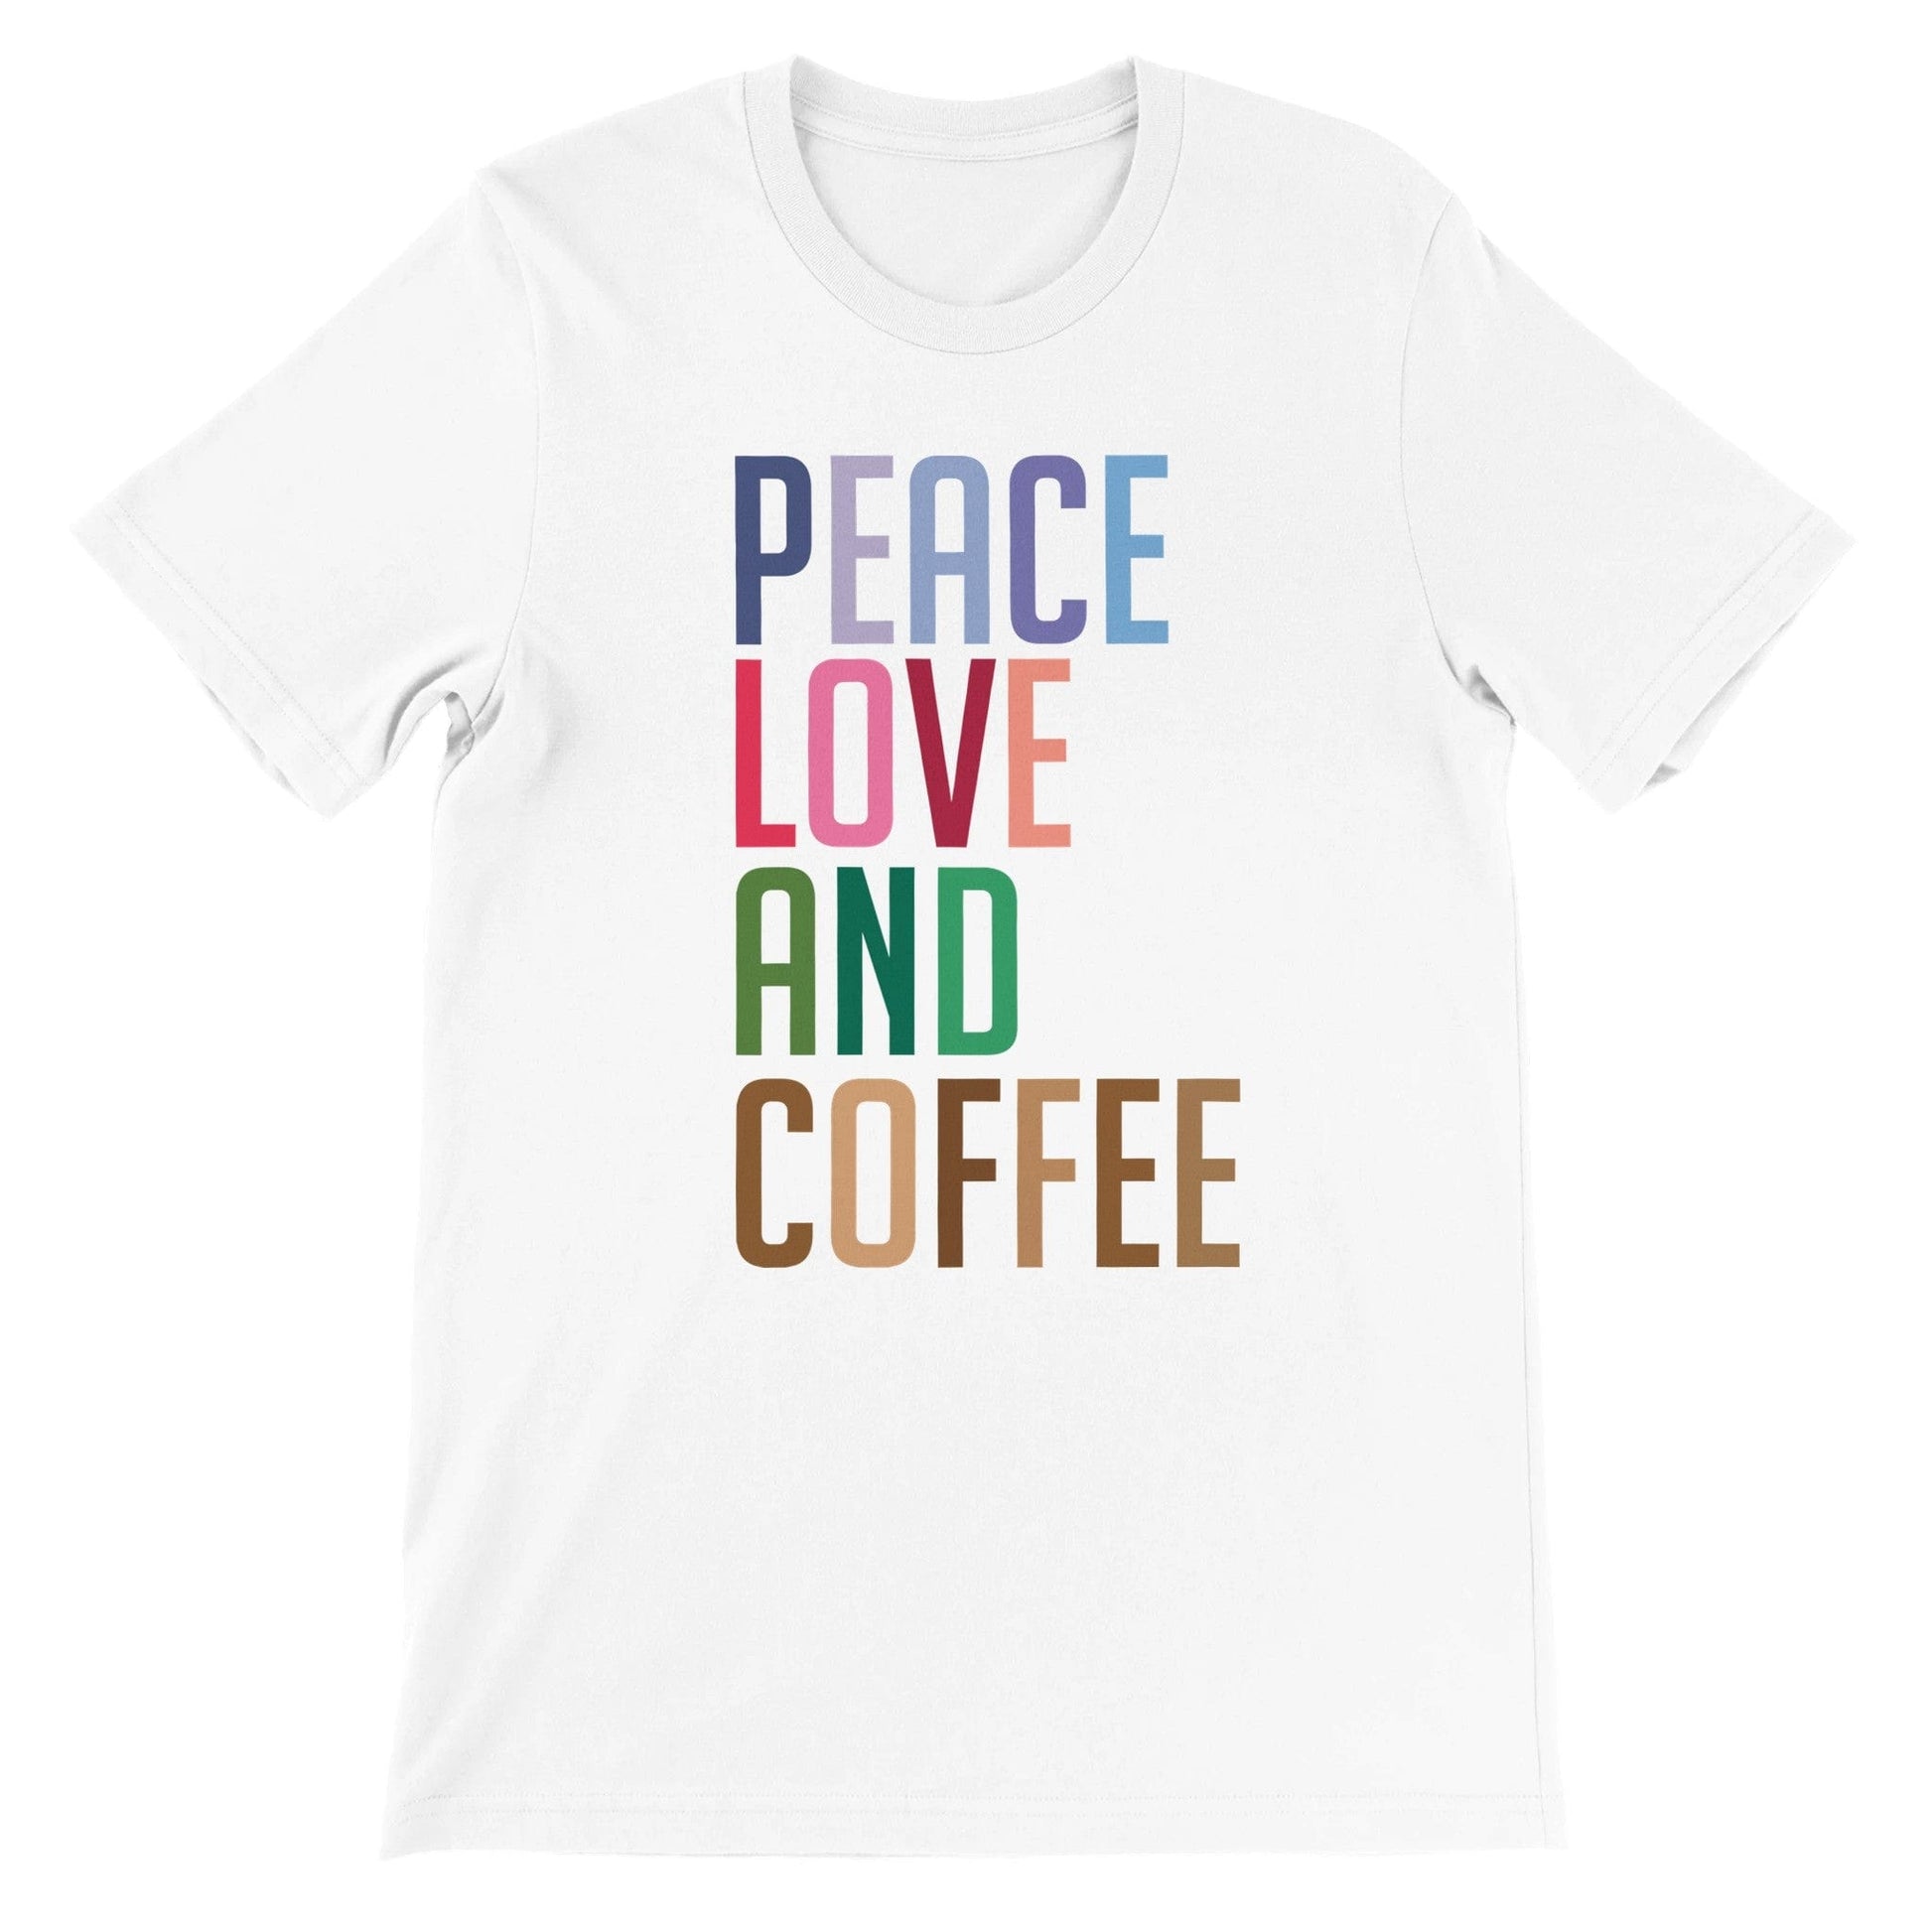 Good Bean Gifts "Peace Love and Coffee" - Unisex Crewneck T-shirt White / S